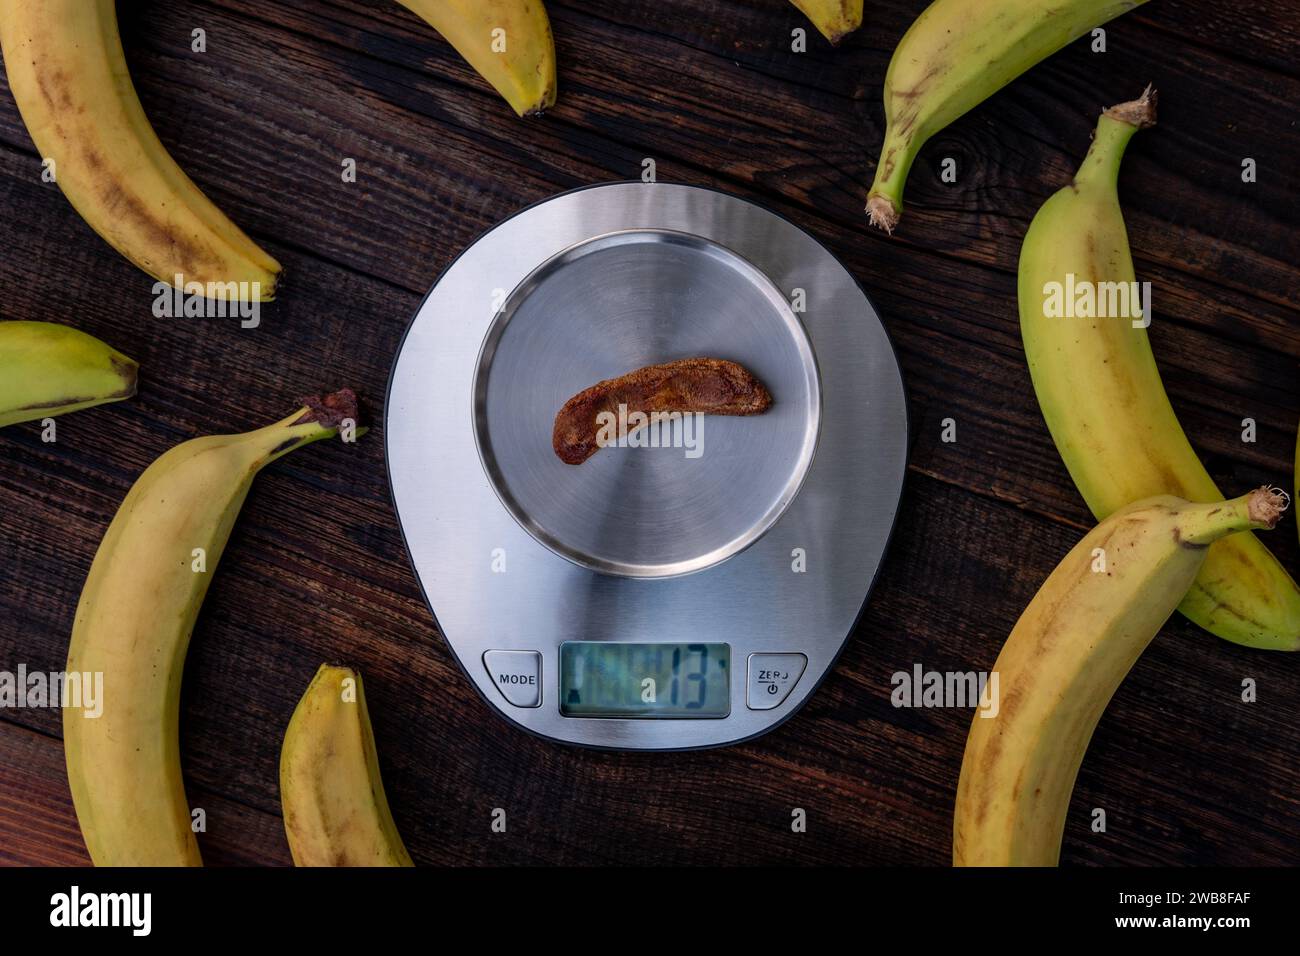 Ripe fresh and dried banana on the scales. Dread sweet on wooden background. concept of weight loss Stock Photo